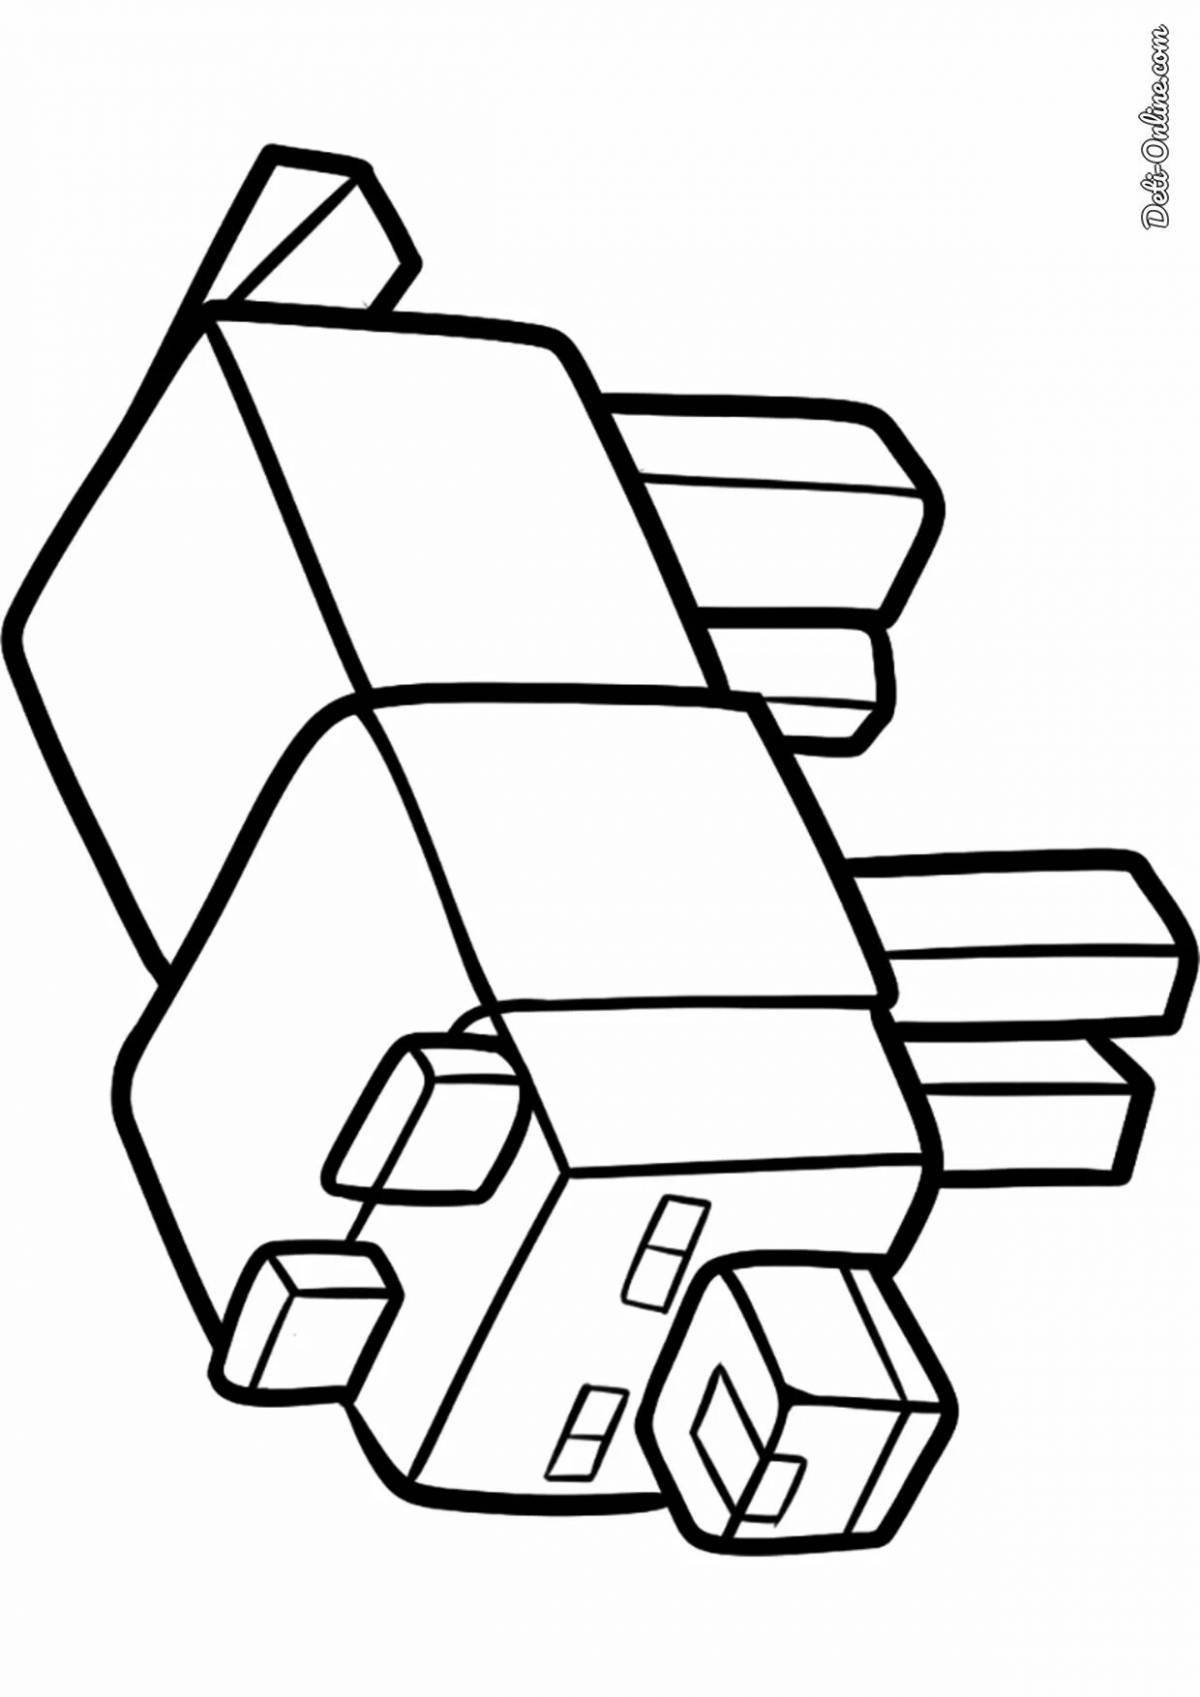 Playful minecraft doggy coloring page